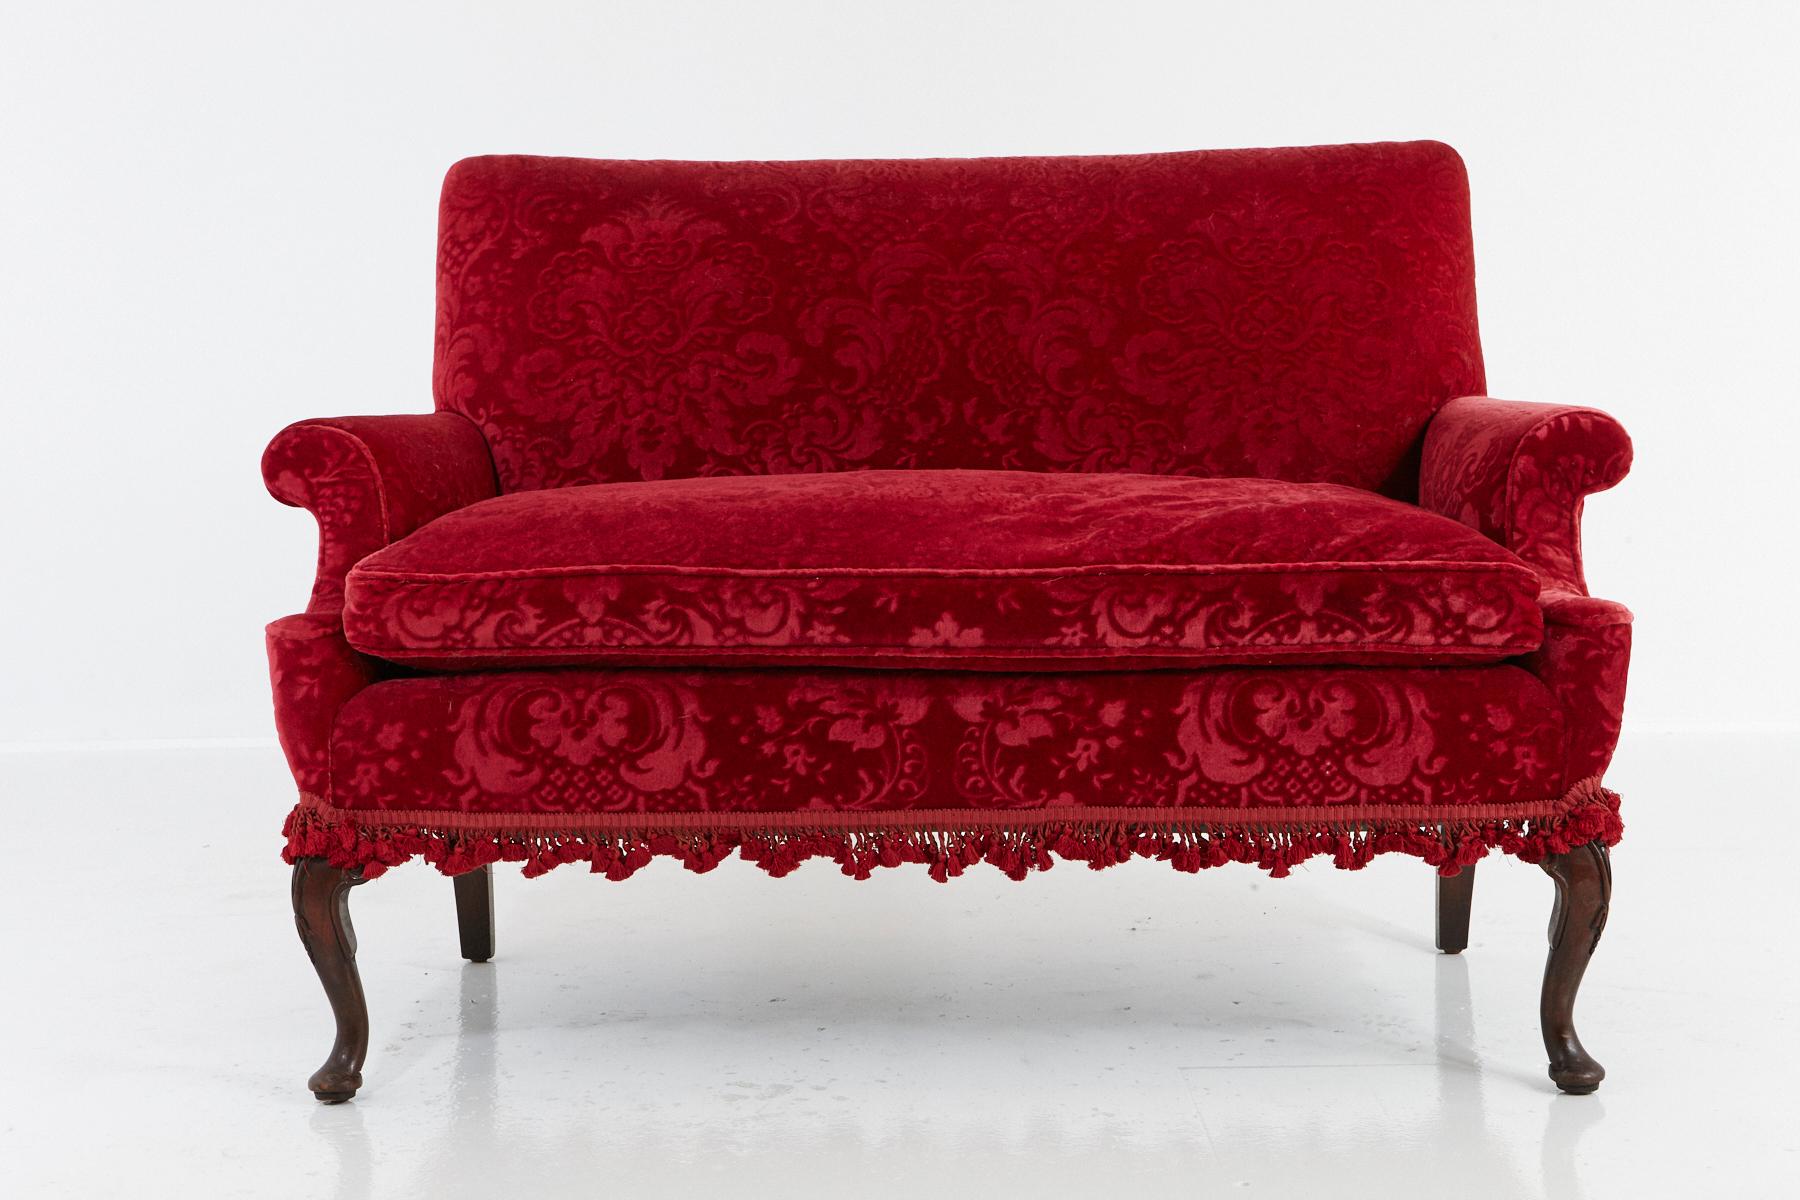 Walnut Victorian Sofa in Red Embossed Acanthus Mohair Upholstery No 1 of 2